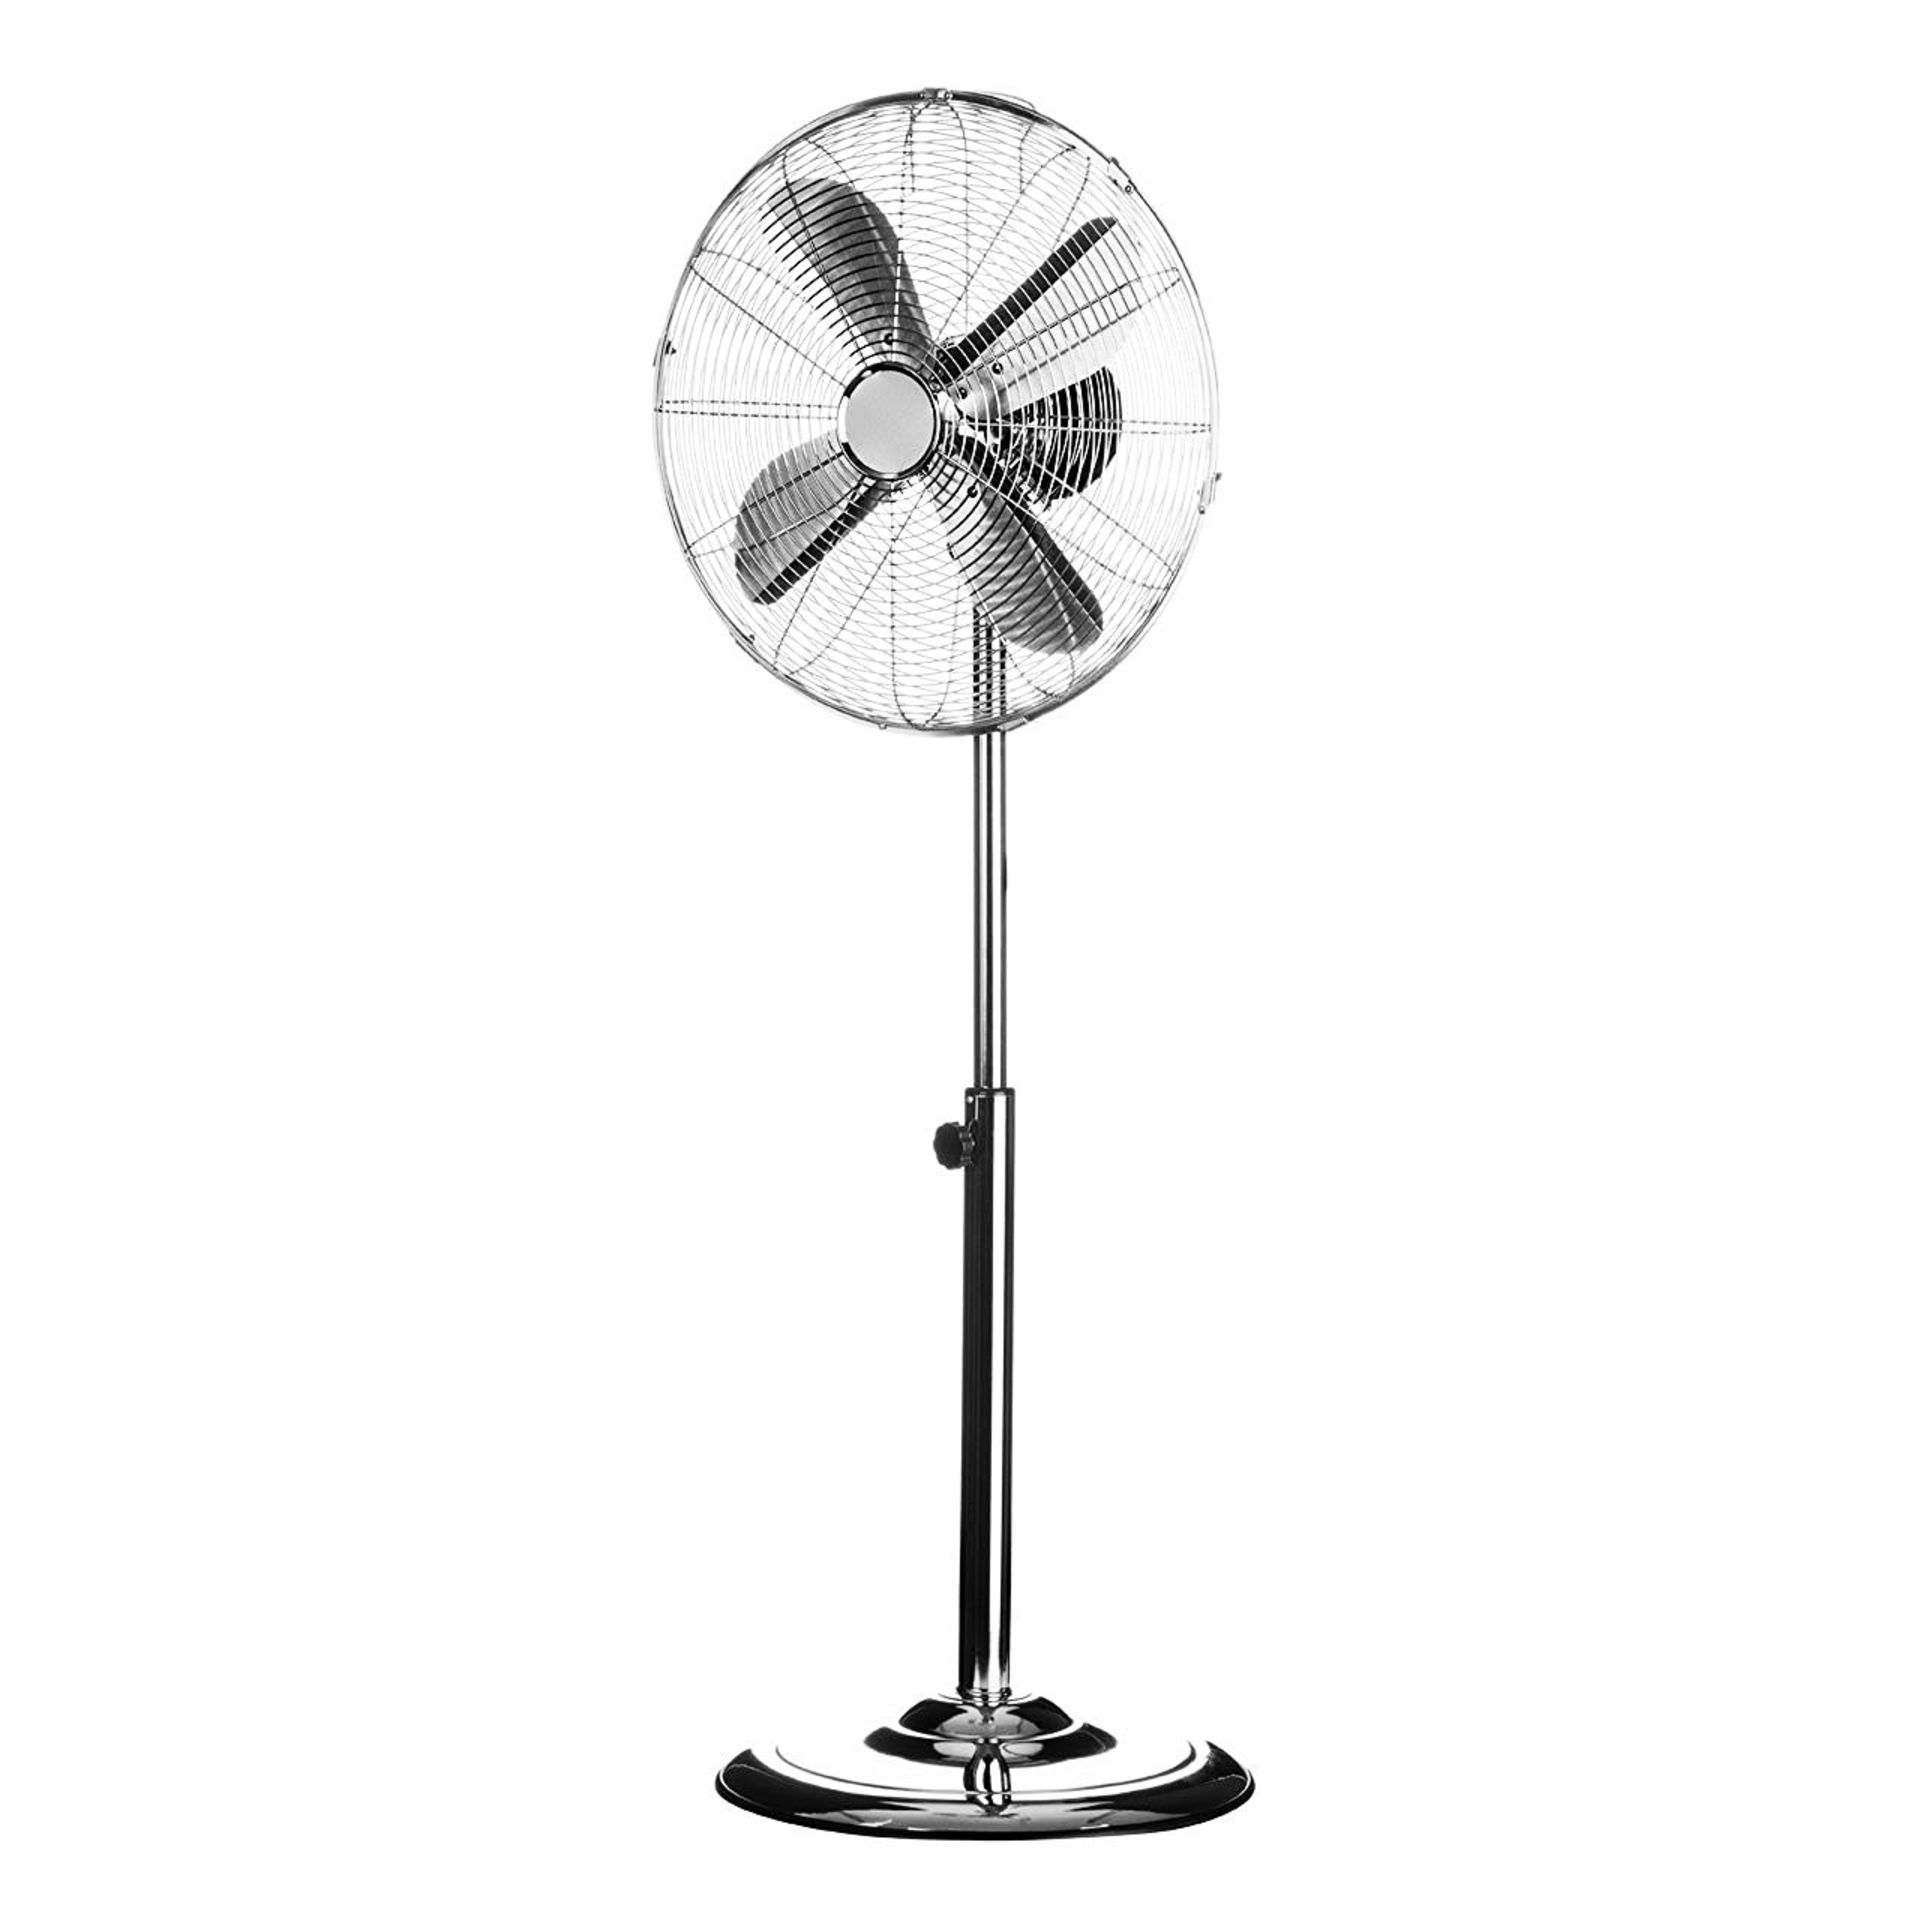 (LF64) 16" Inch 40cm Chrome Metal Pedestal 3 Speed Stand Fan Cooling Stay cool this yea... - Image 2 of 2